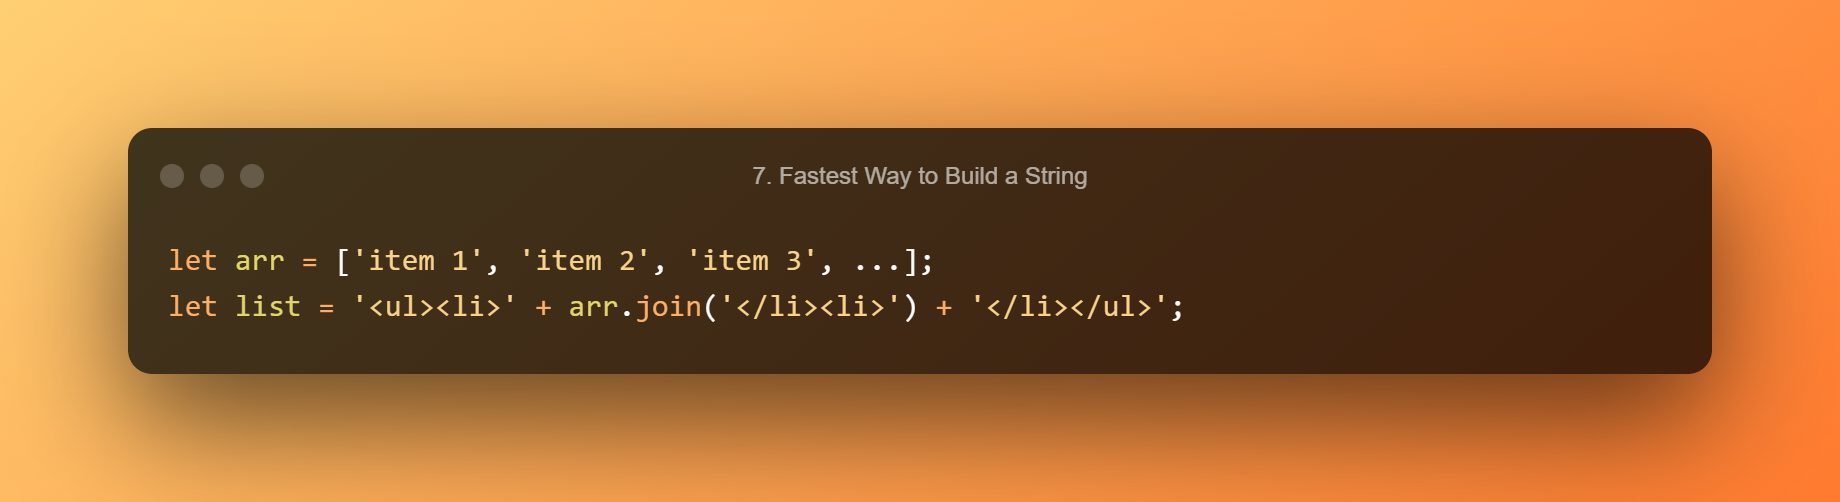 7. Fastest Way To Build A String